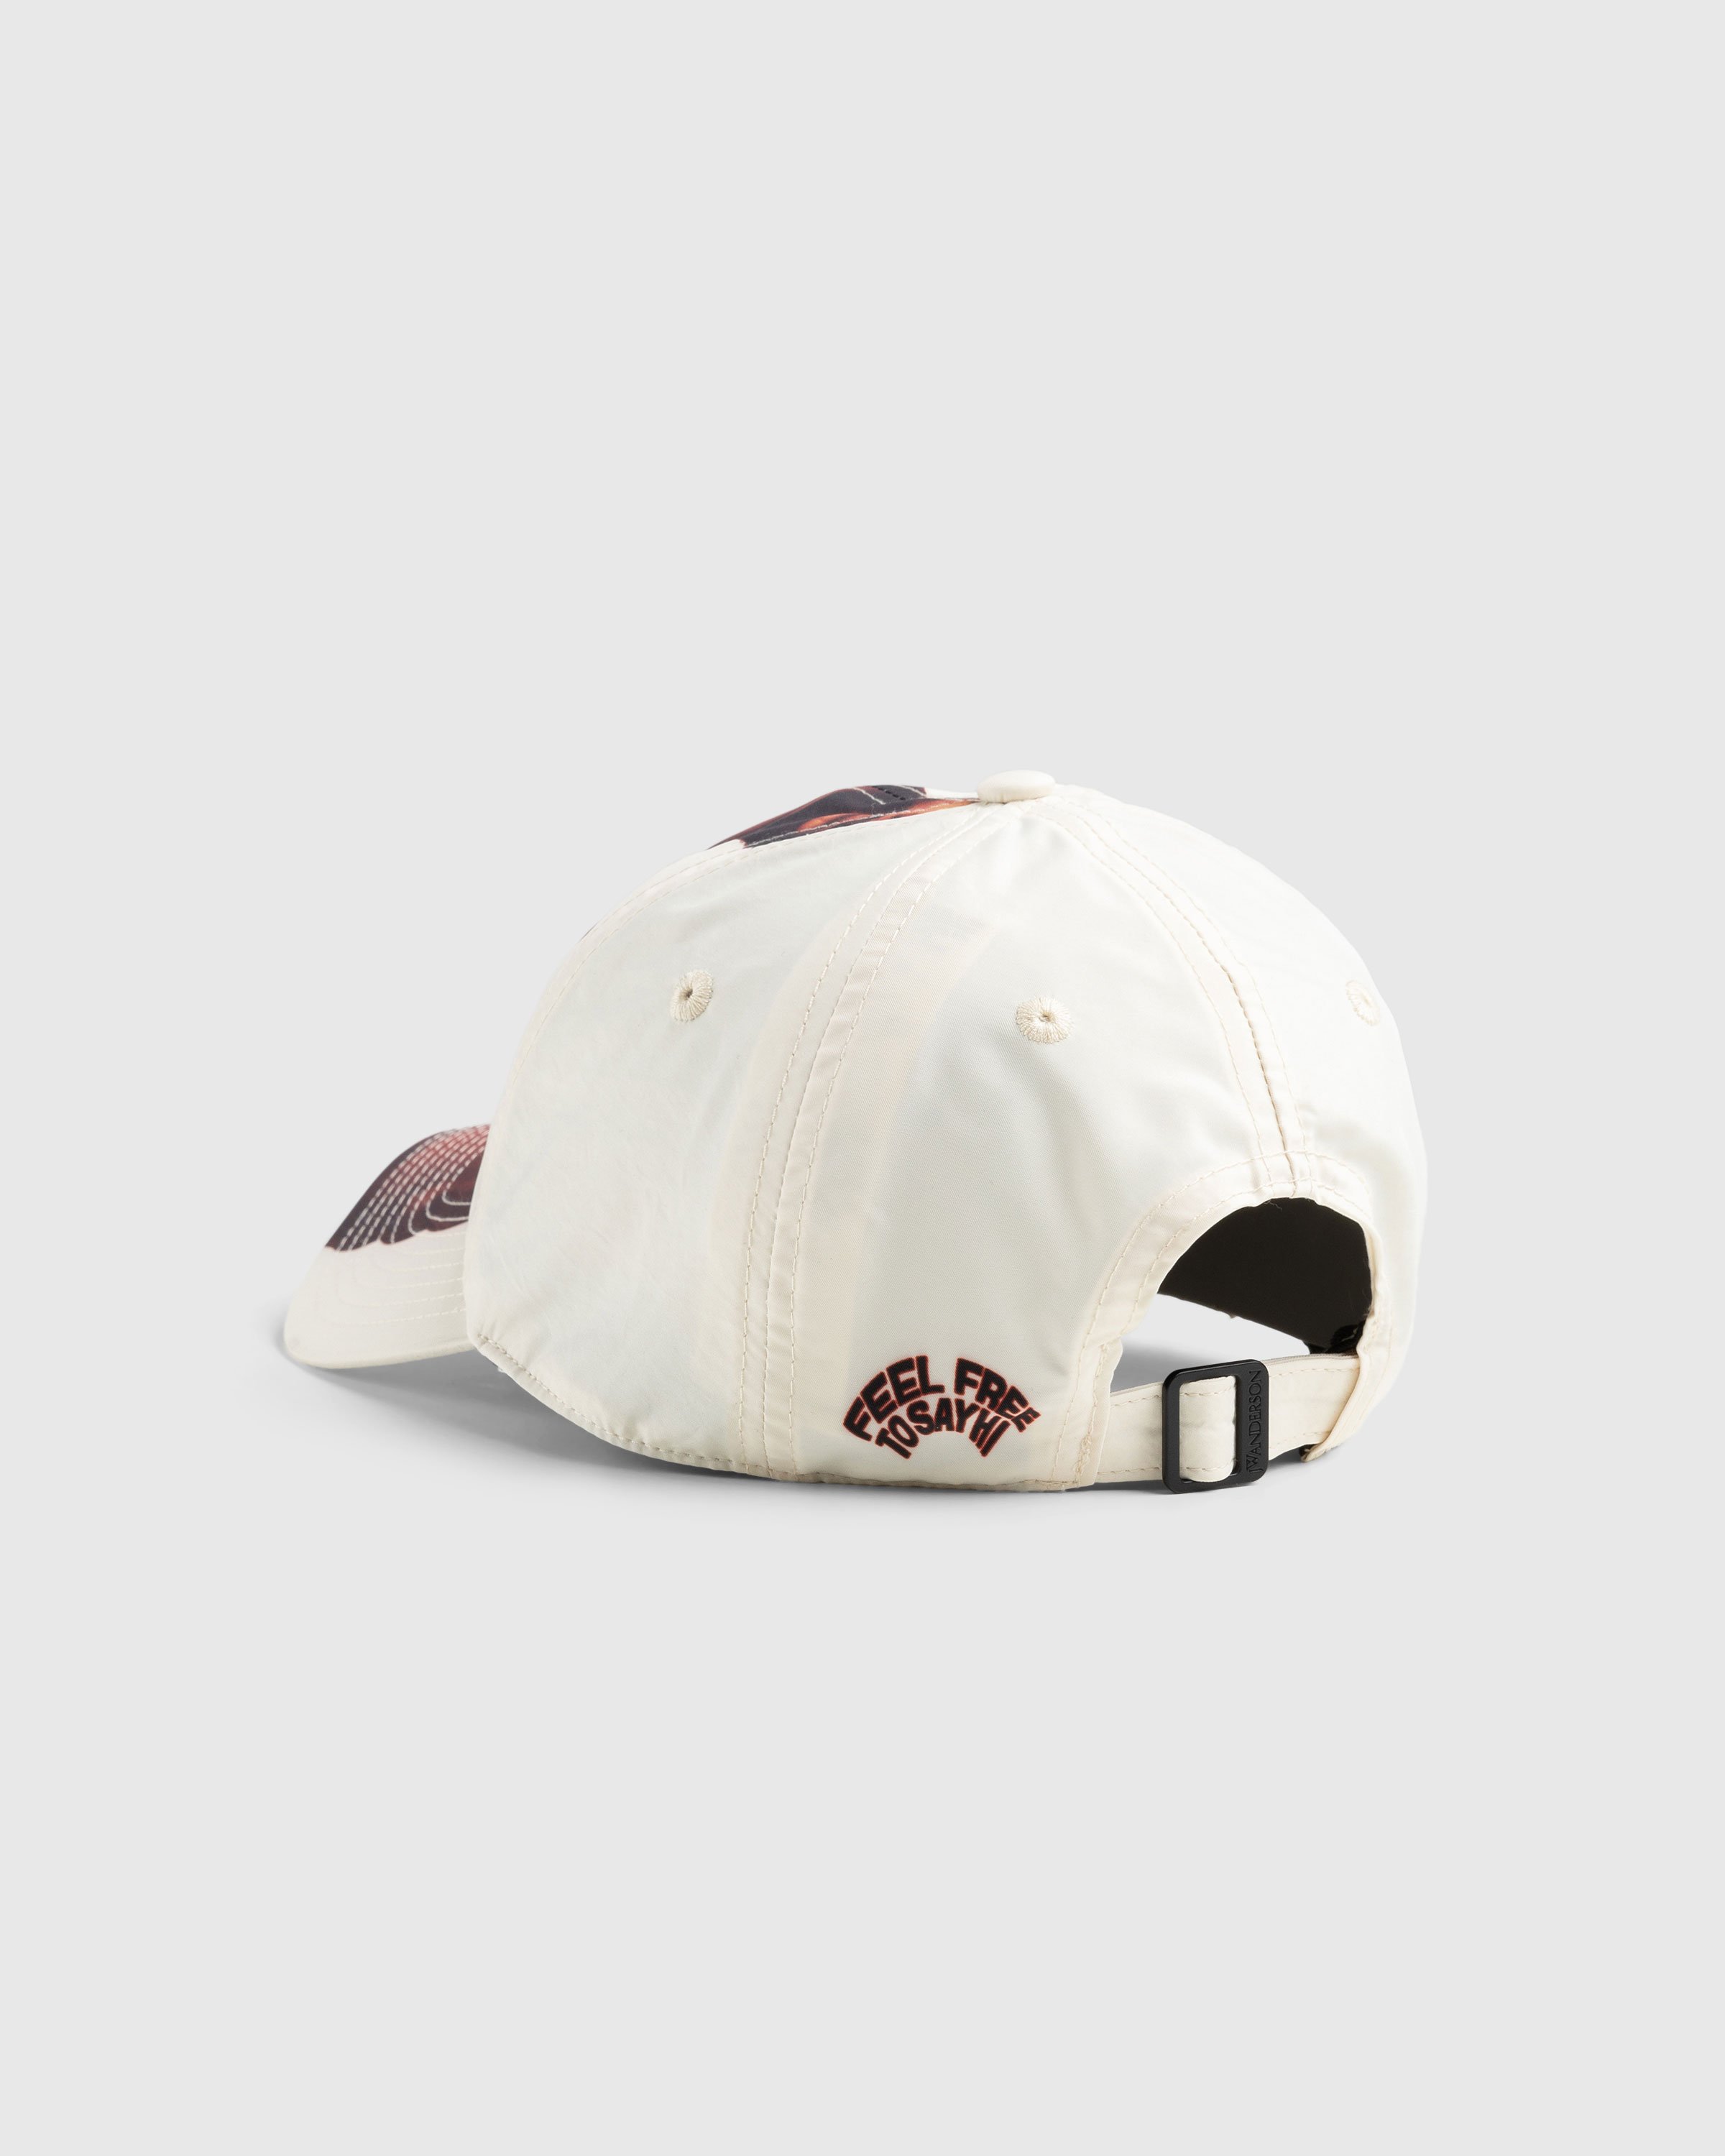 J.W. Anderson - Logo Embroidered Baseball Cap Off White - Accessories - White - Image 3